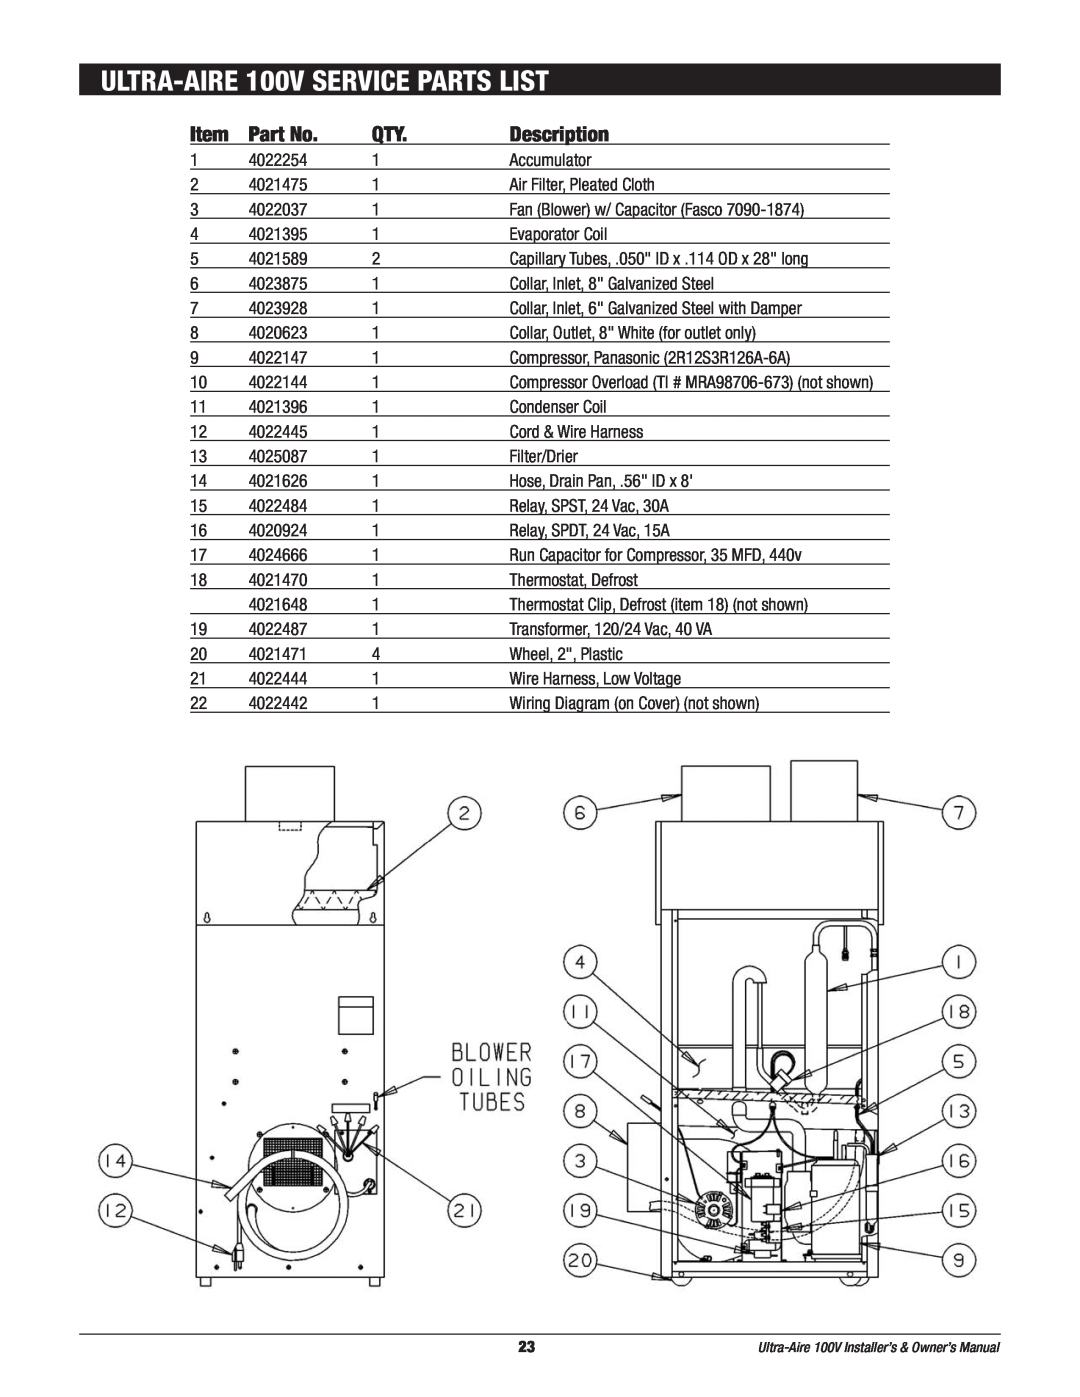 Therma-Stor Products Group Ultra-Aire 100V owner manual ULTRA-AIRE100V SERVICE PARTS LIST, Description 